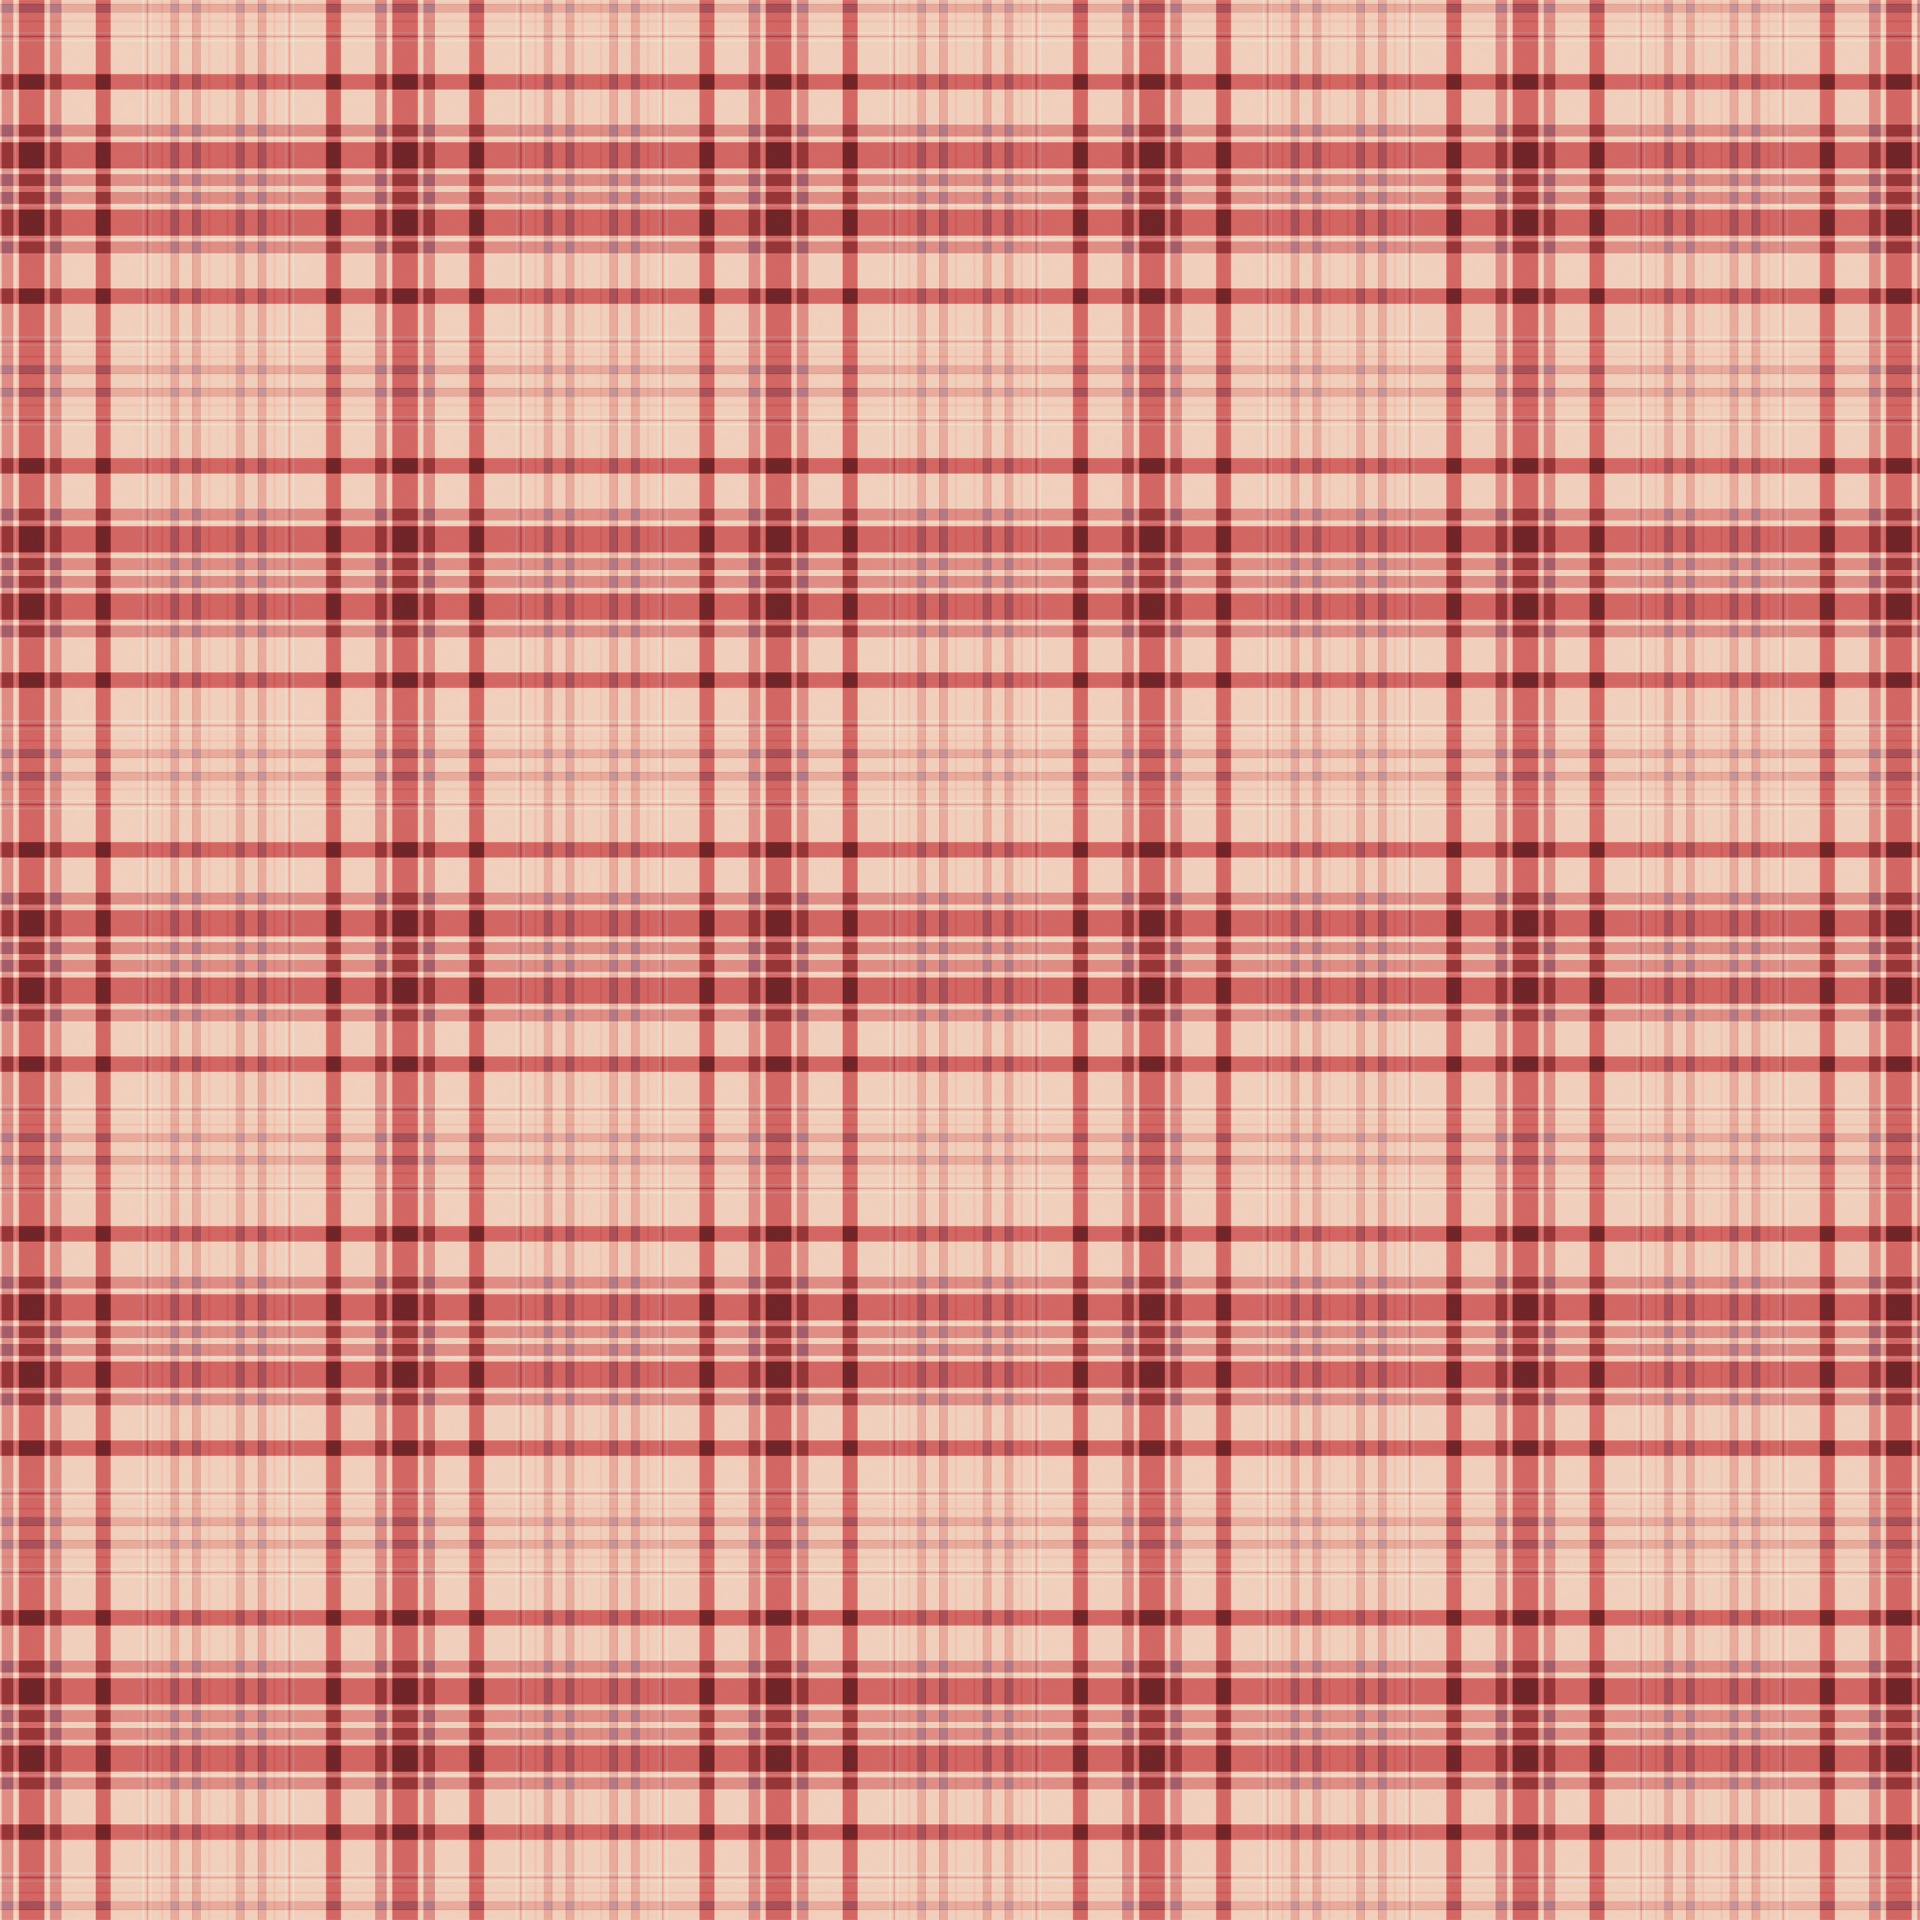 Check Background Red Plaid Free Stock Photo Public HD Wallpapers Download Free Map Images Wallpaper [wallpaper684.blogspot.com]